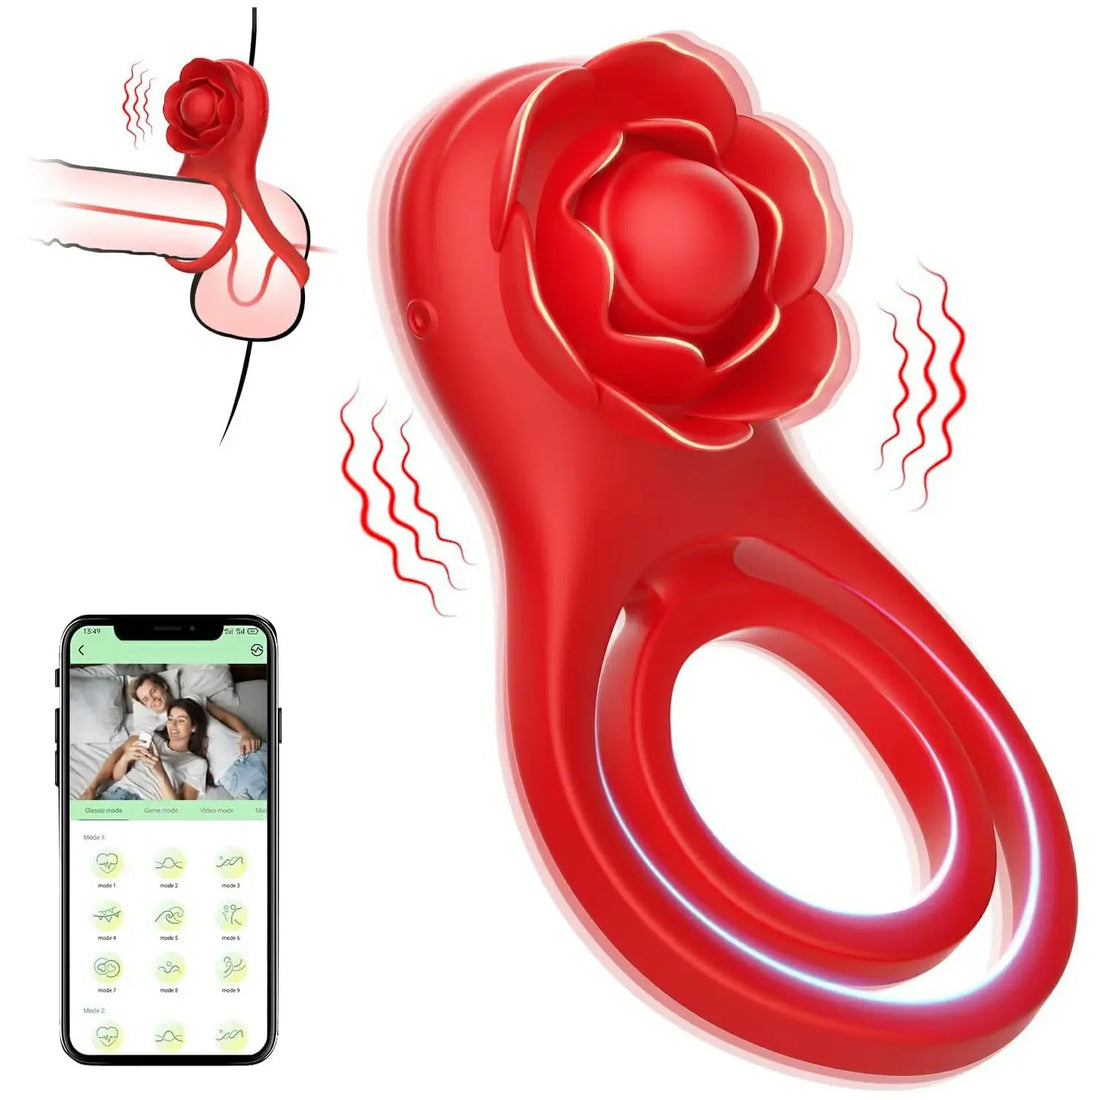 Rose_Wireless_Remote_Control_Cock_Ring